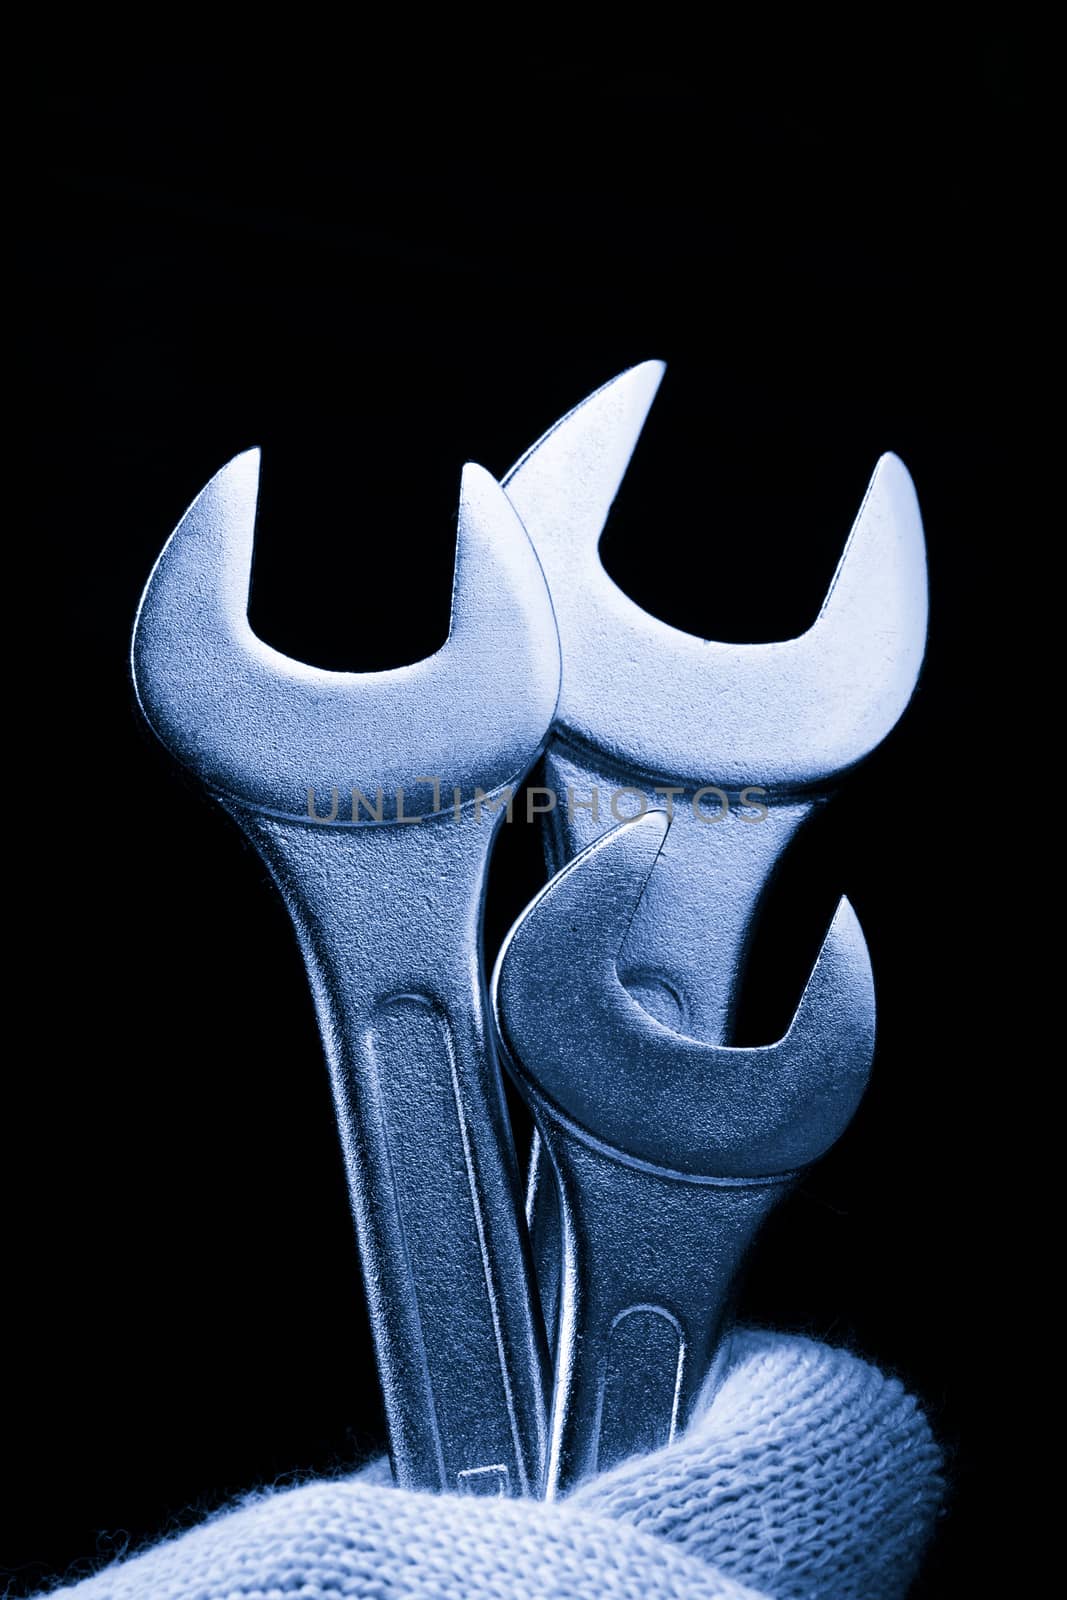 Metallic wrenches in male hand